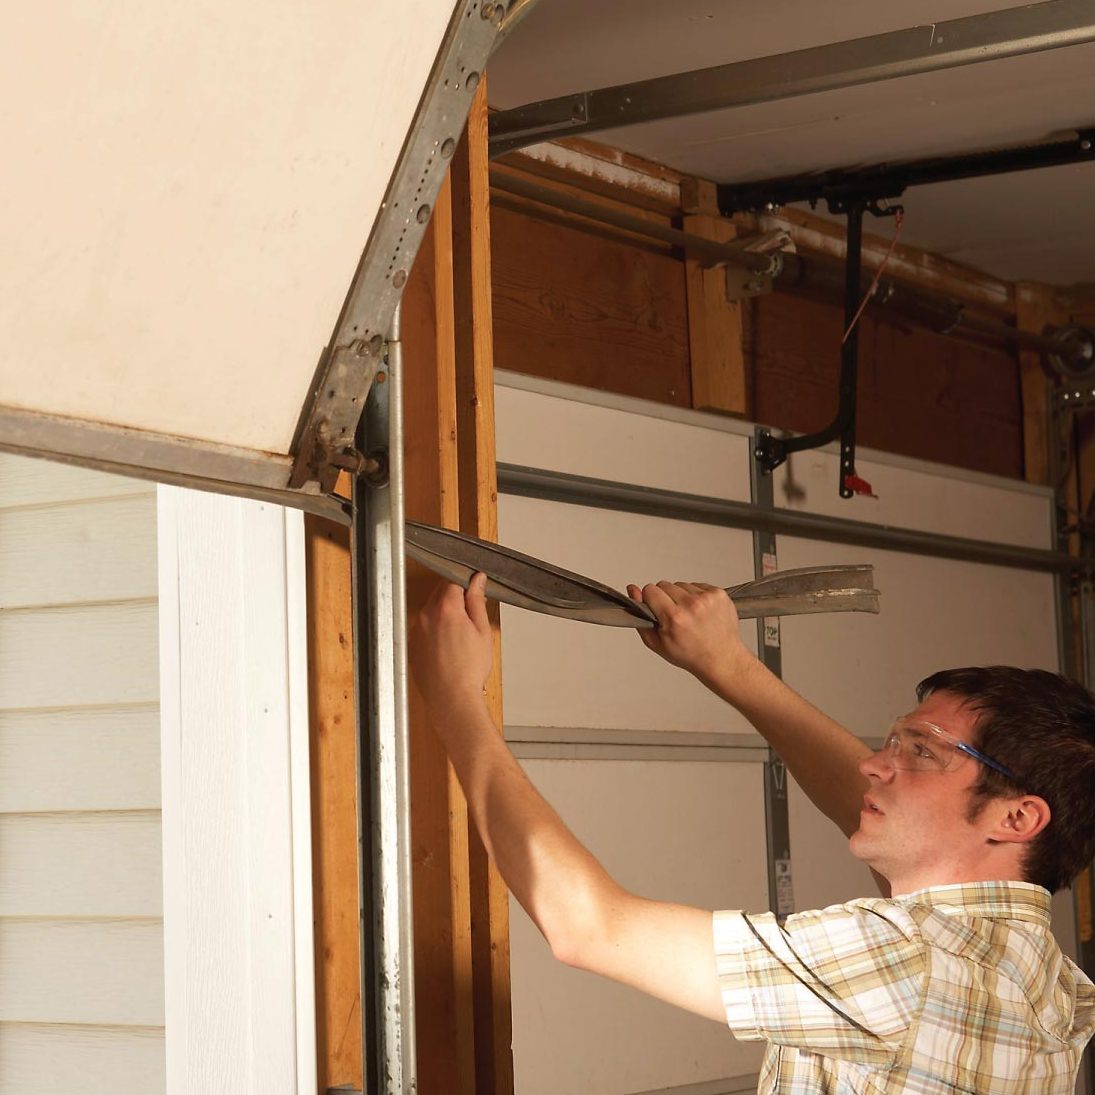 8 Simple Steps to Installing Door Weather Stripping (Correctly)